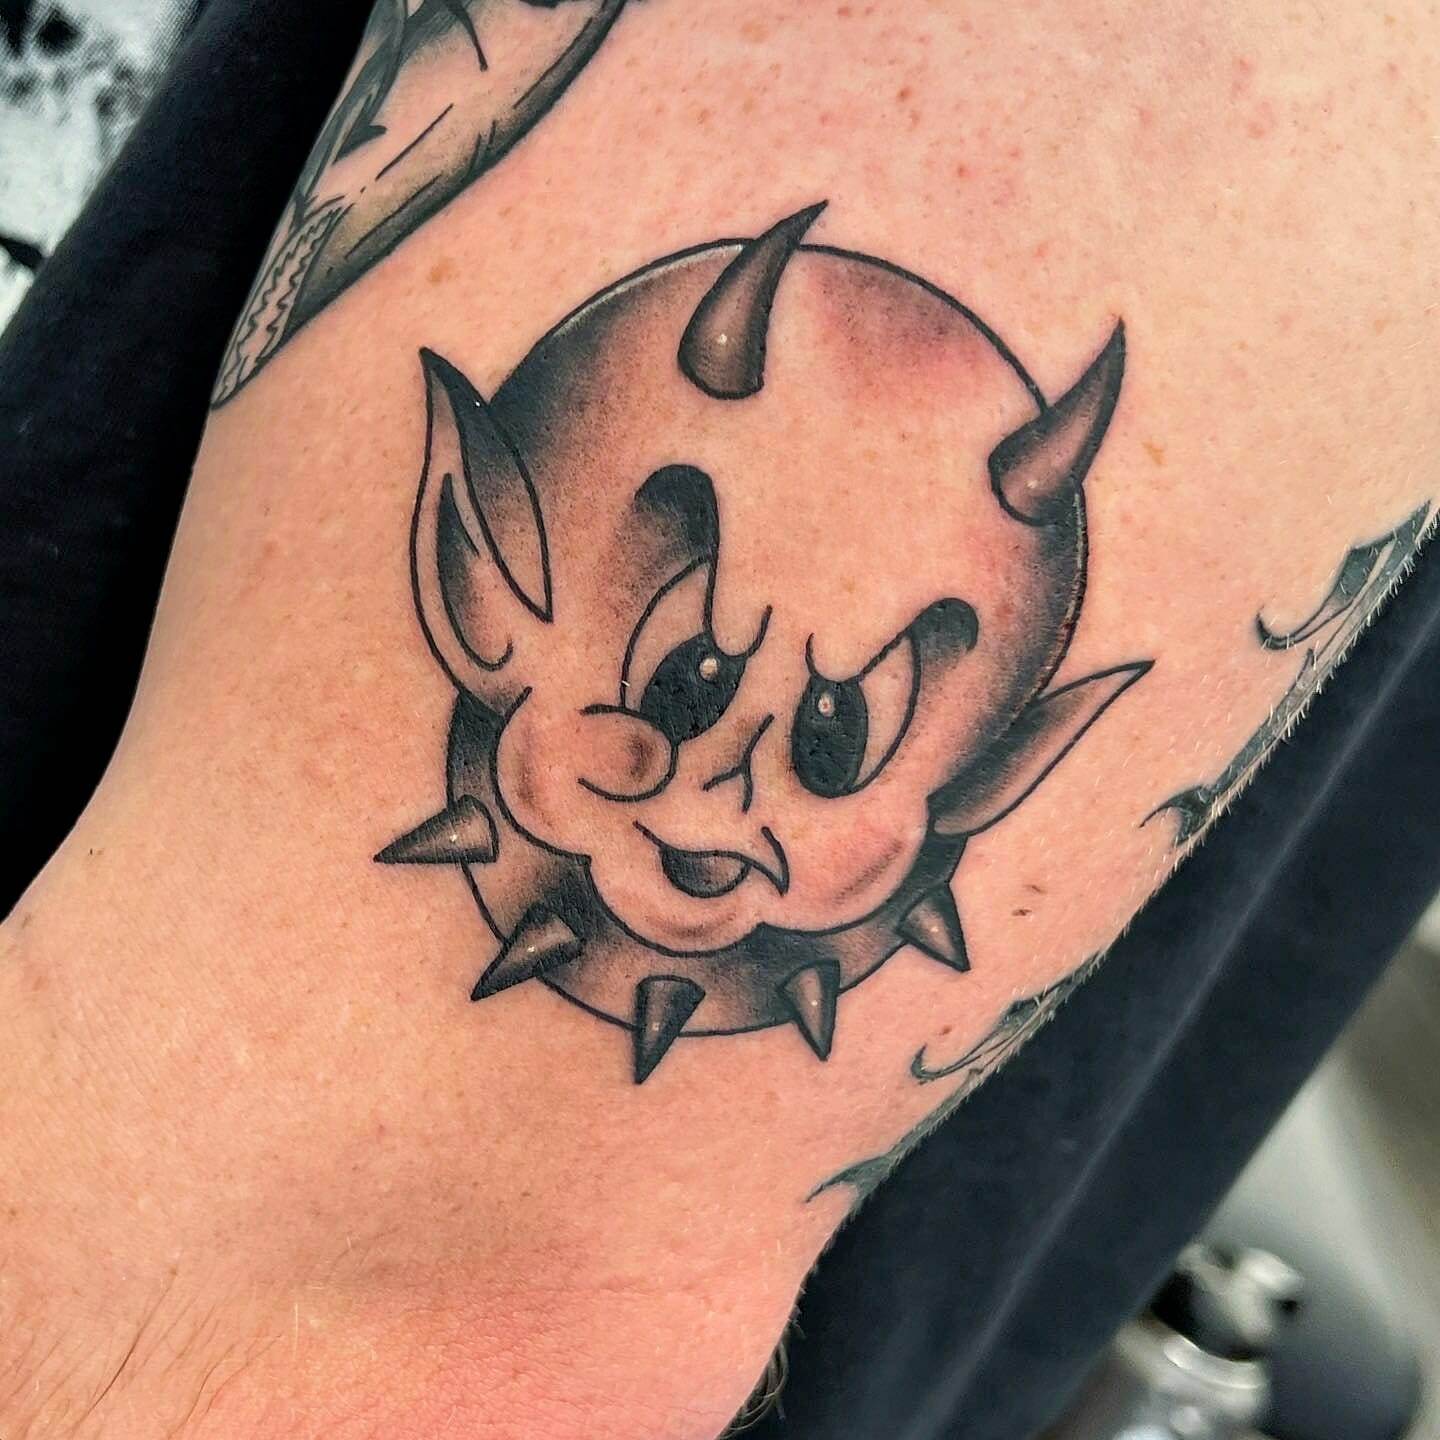 16 Subtle Anime Tattoos That Cleverly Reference Anime Series | Naruto tattoo,  Fandom tattoos, Anime tattoos